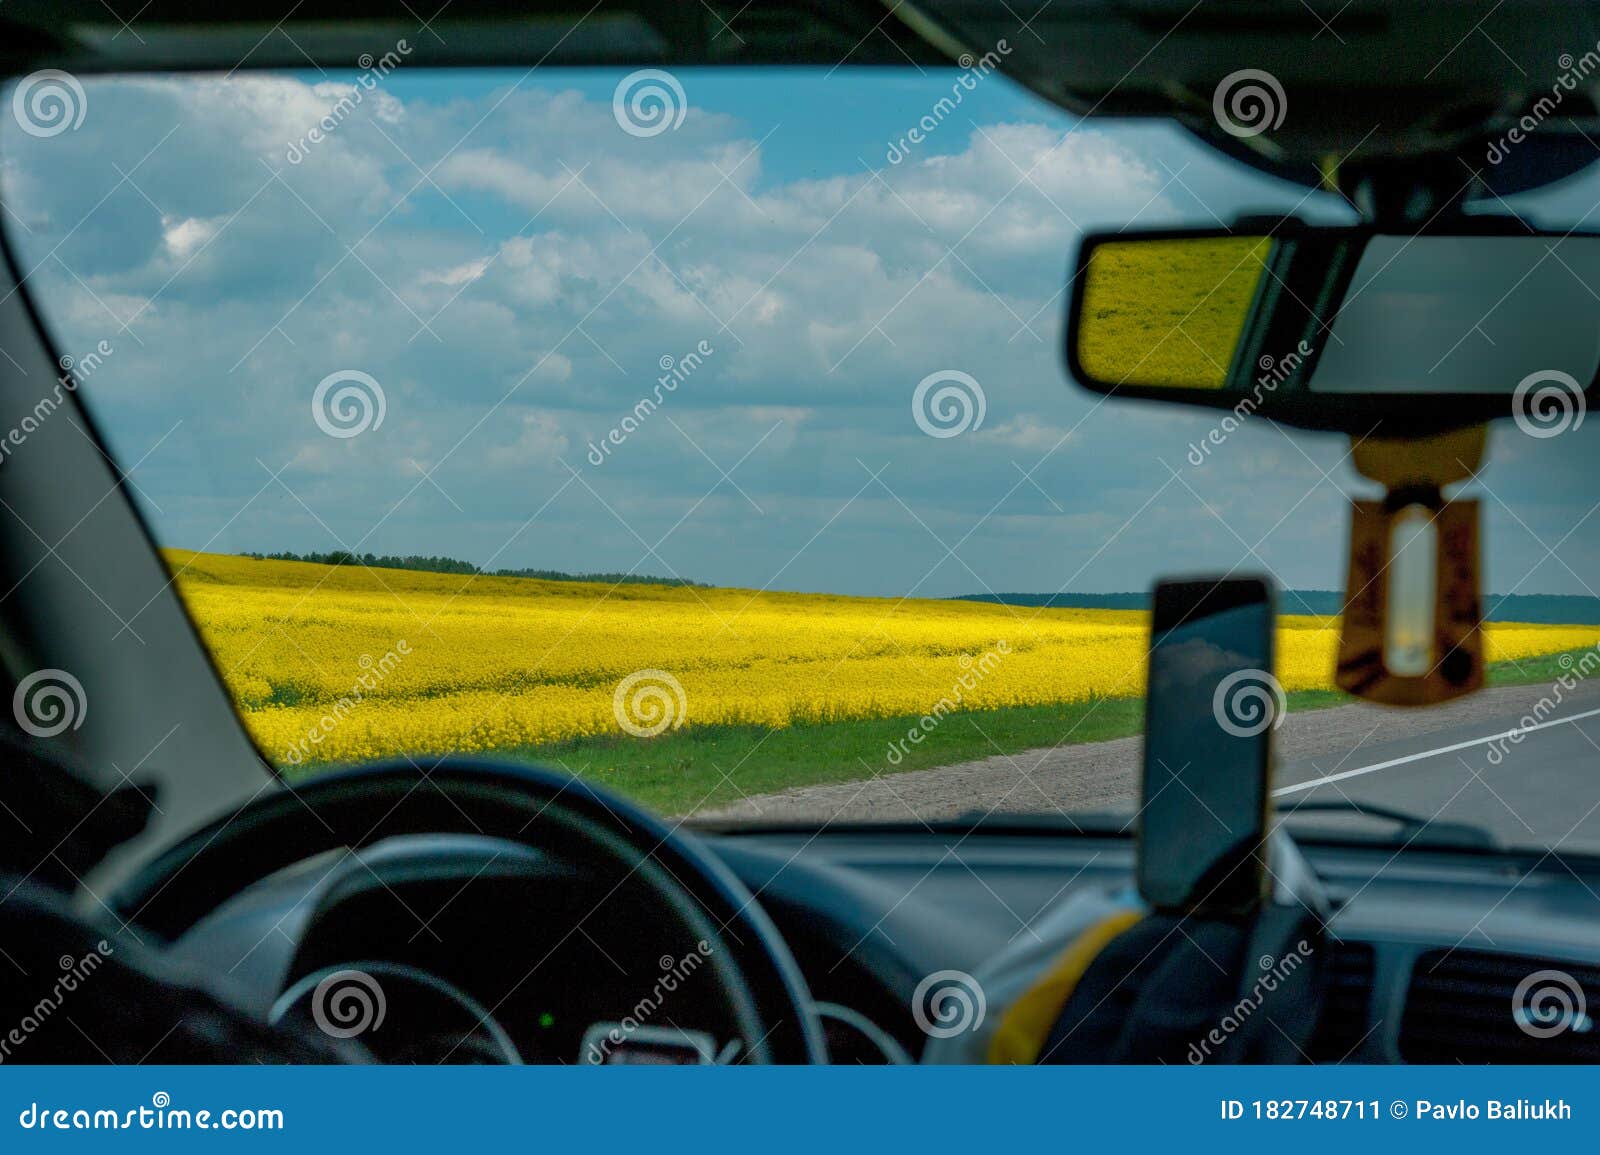 agricultural fields in springtime from the car. yellow fields of oilseed rape and road, turism, adventure